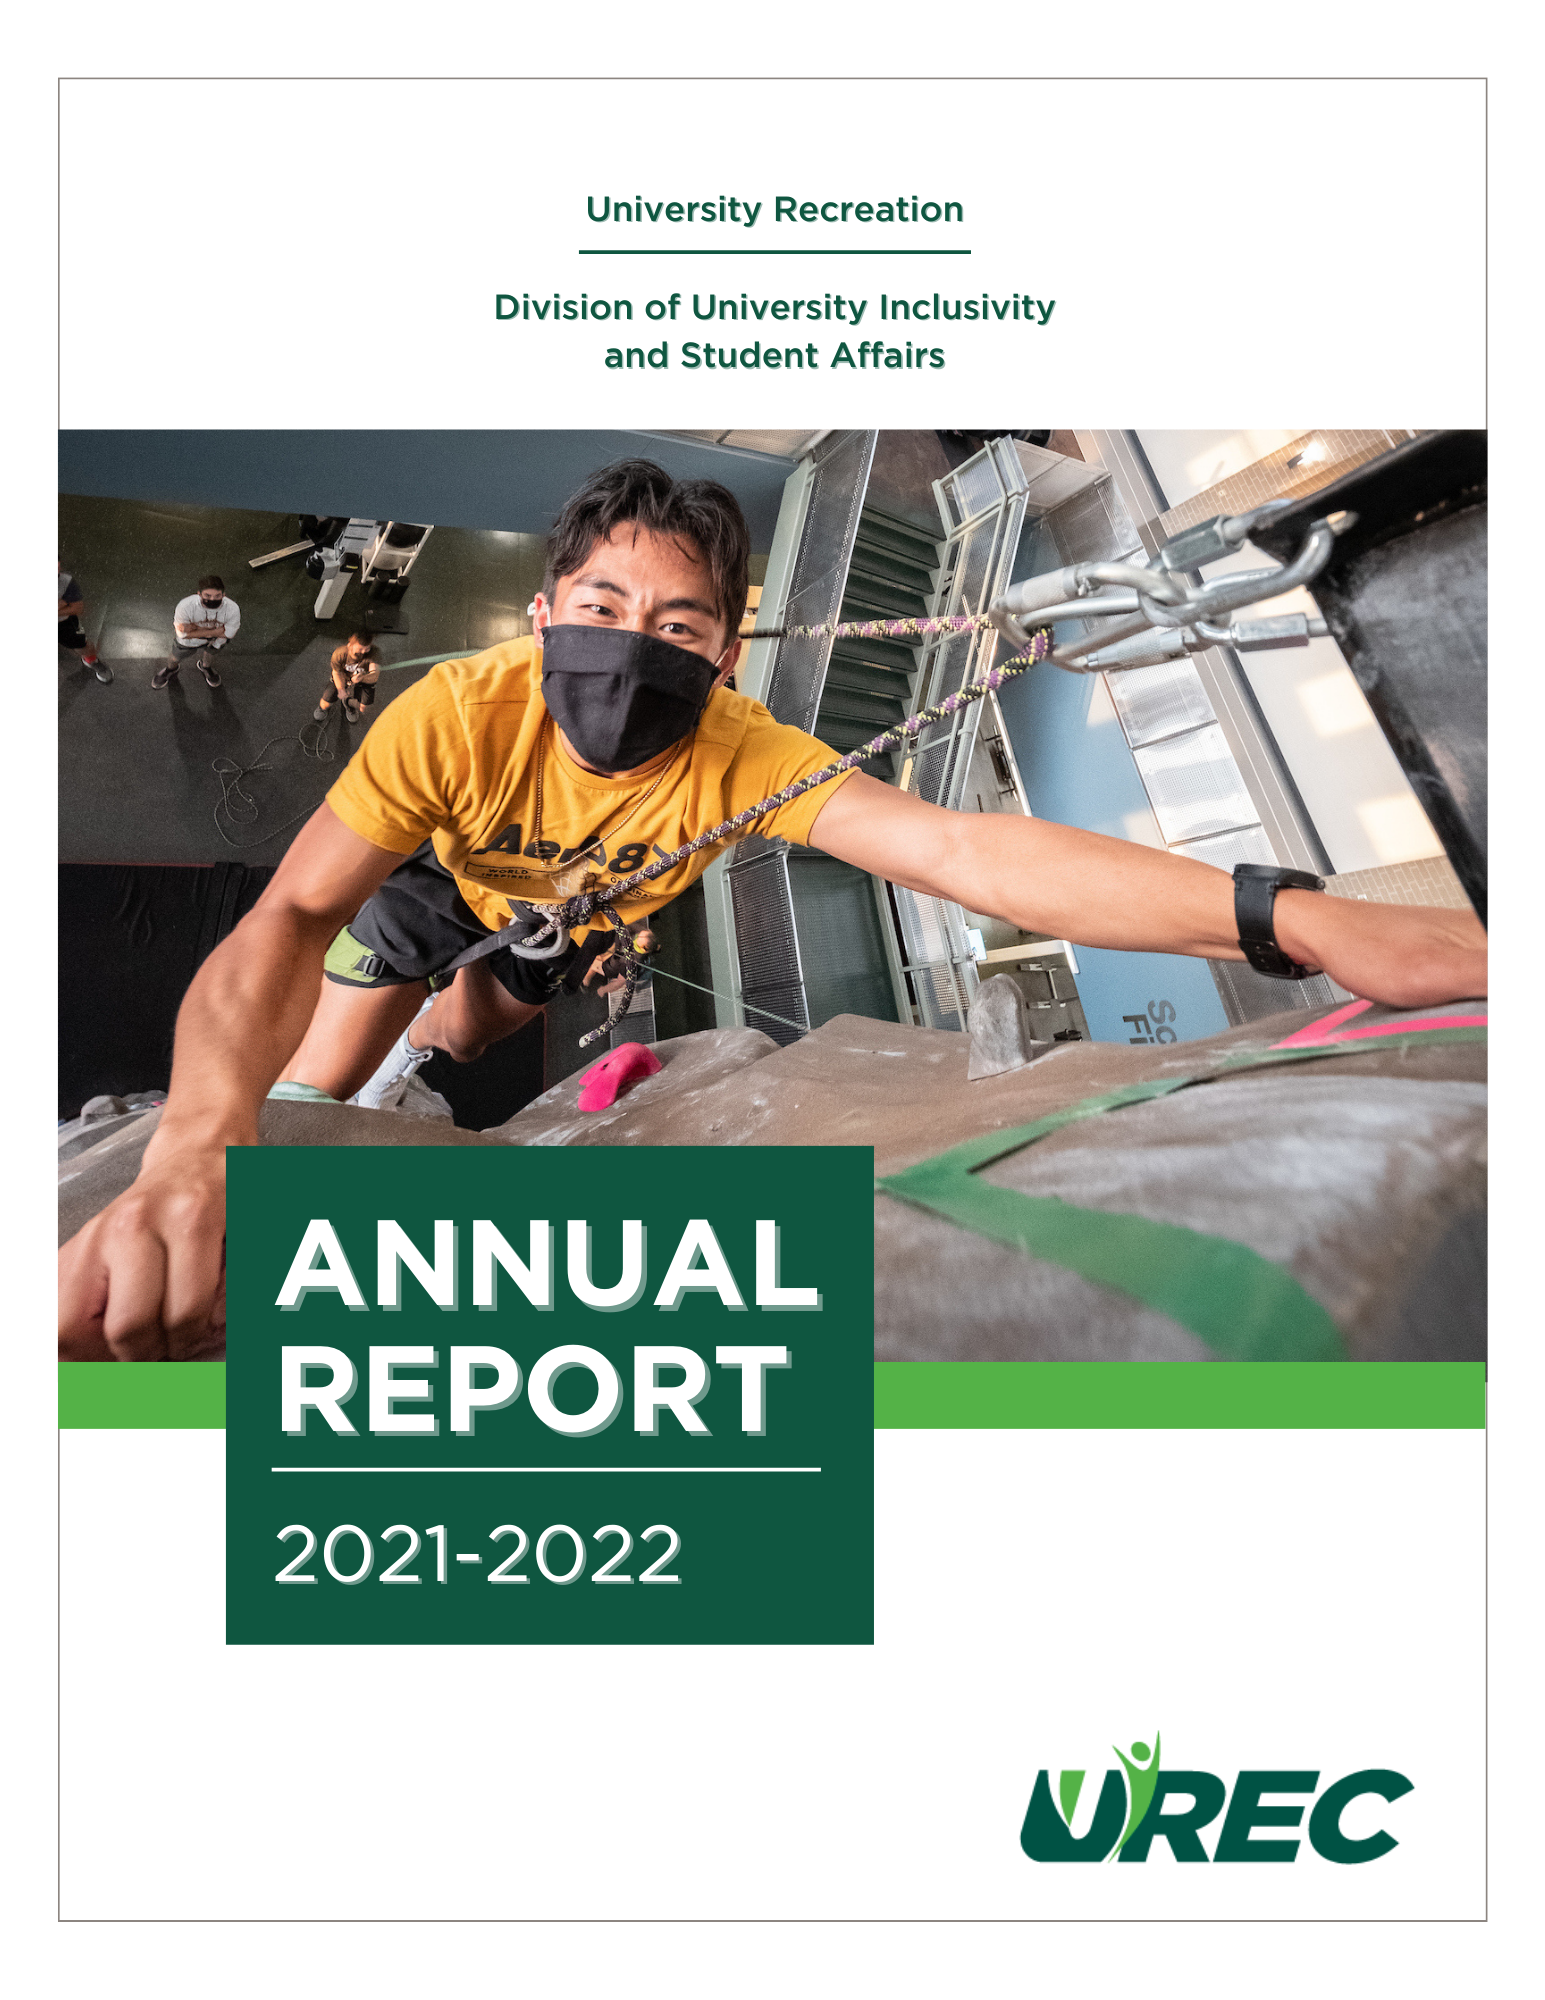 Annual Report front page